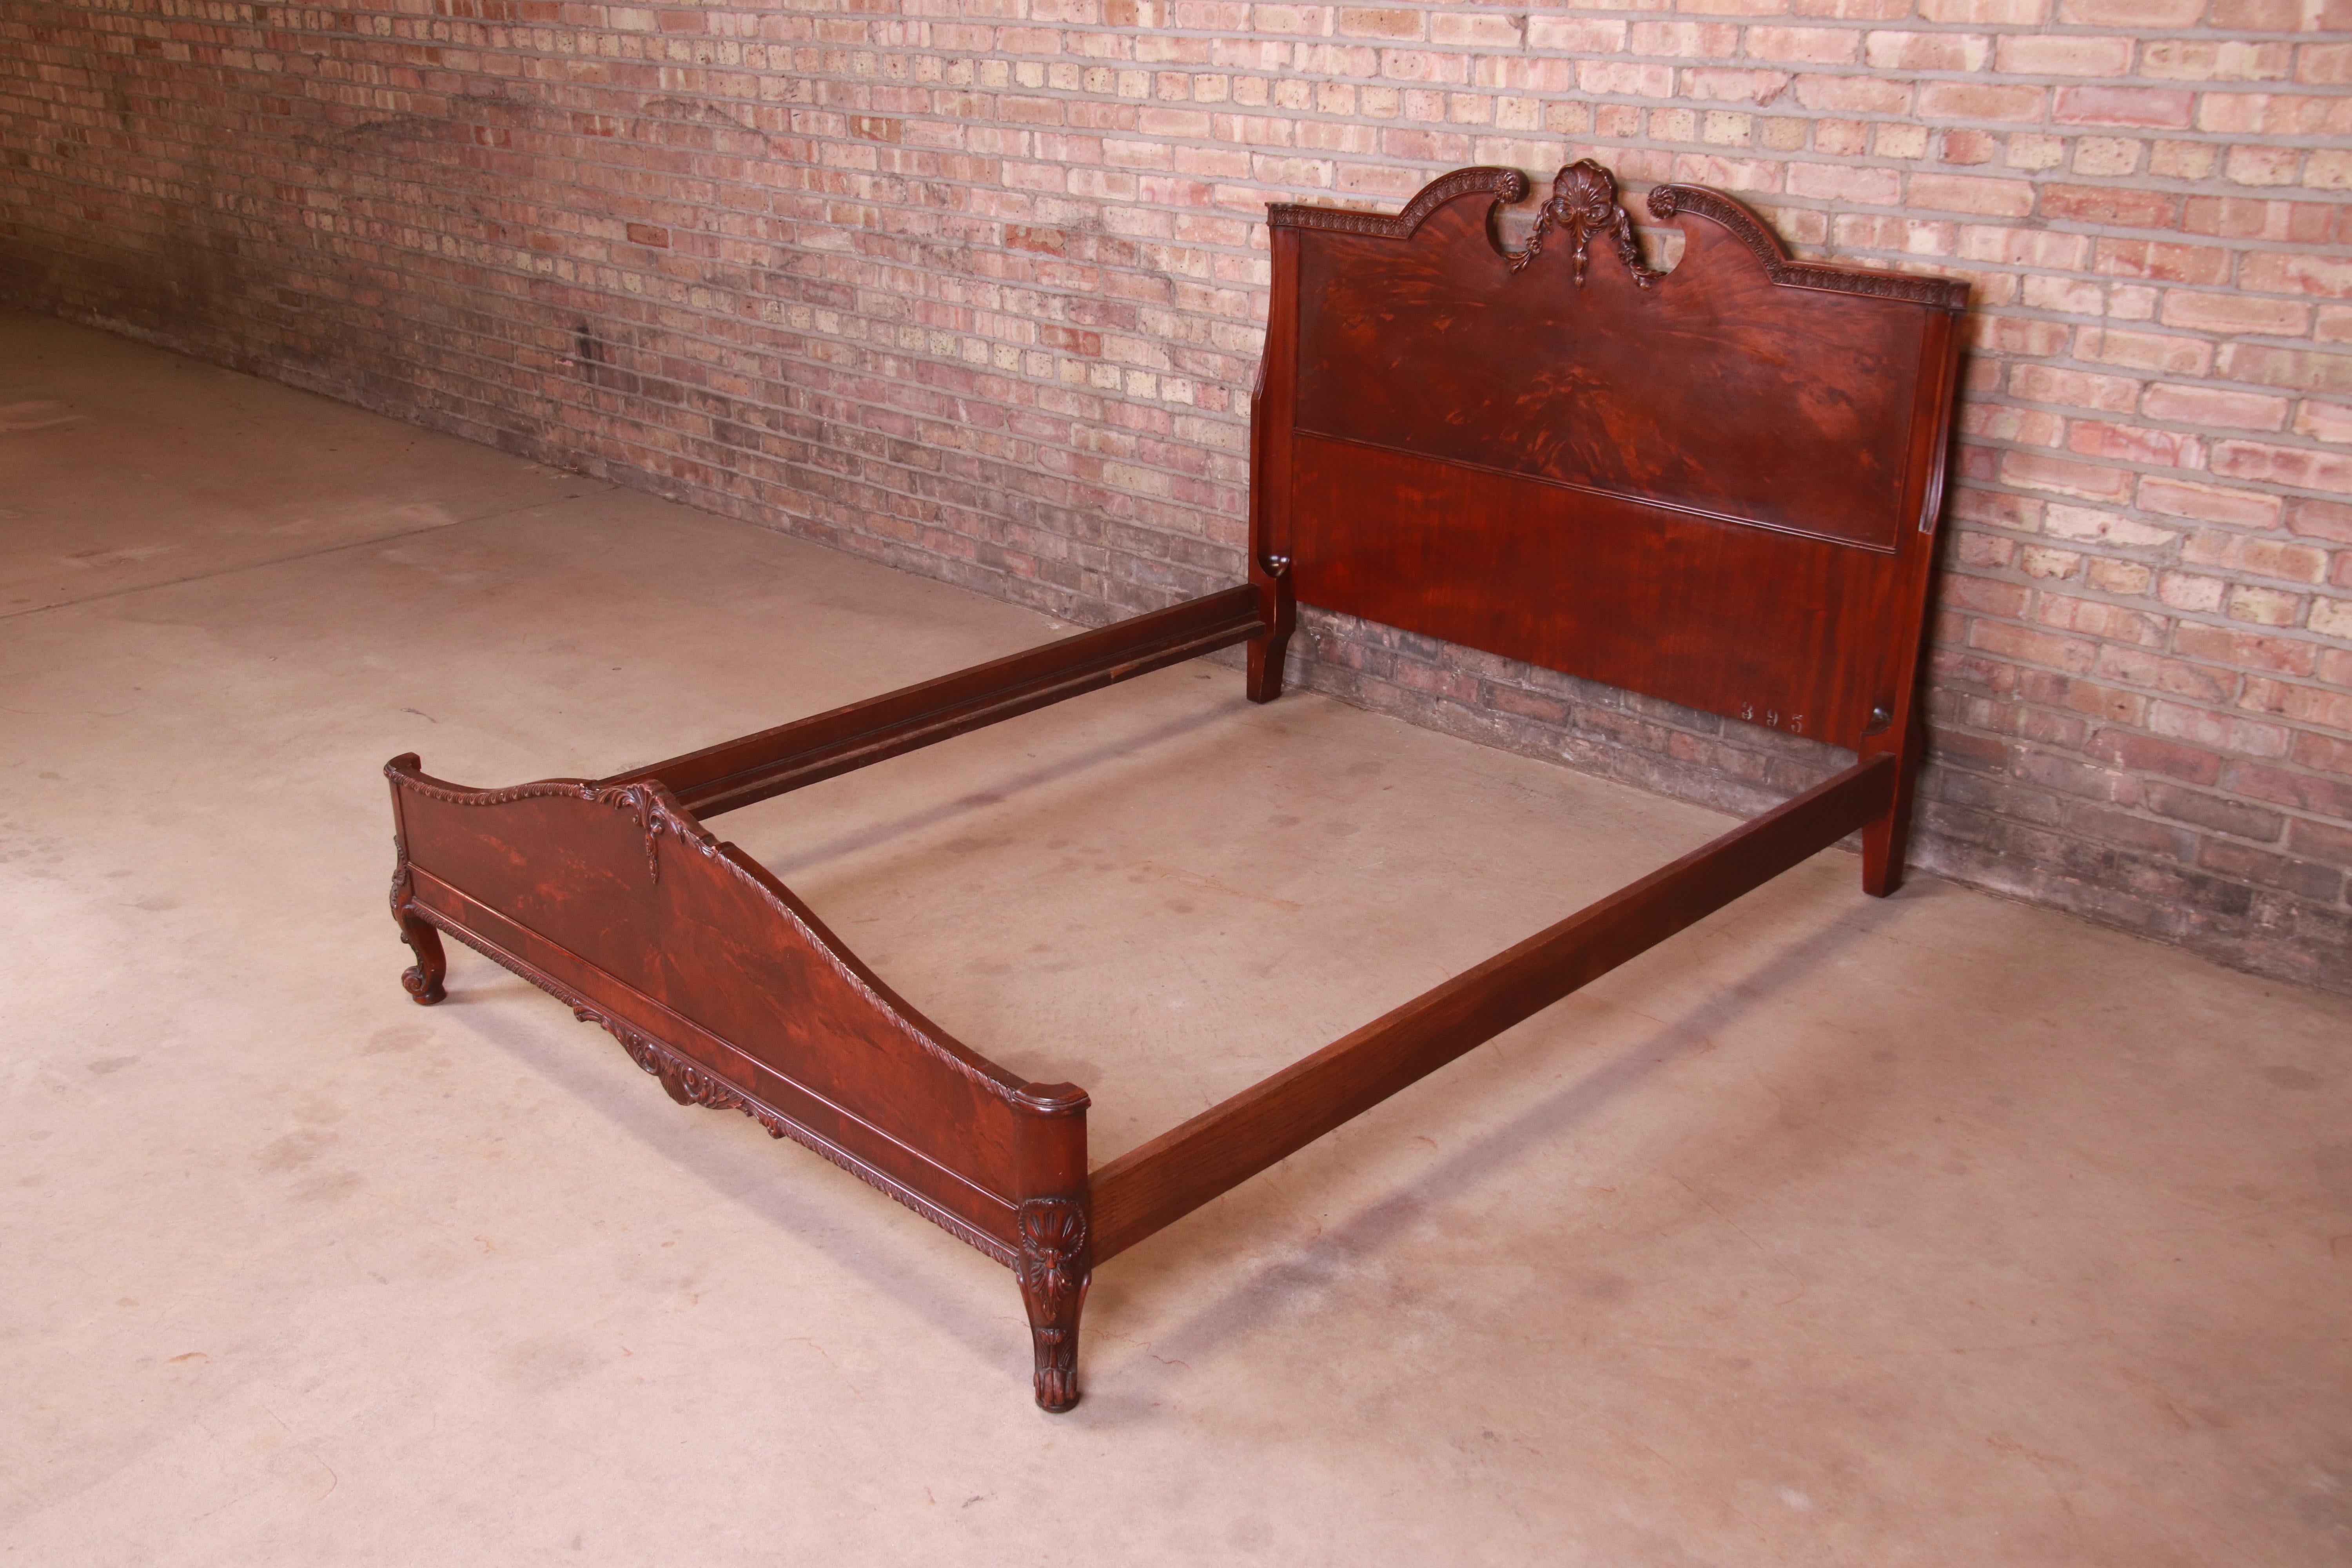 1920s bed